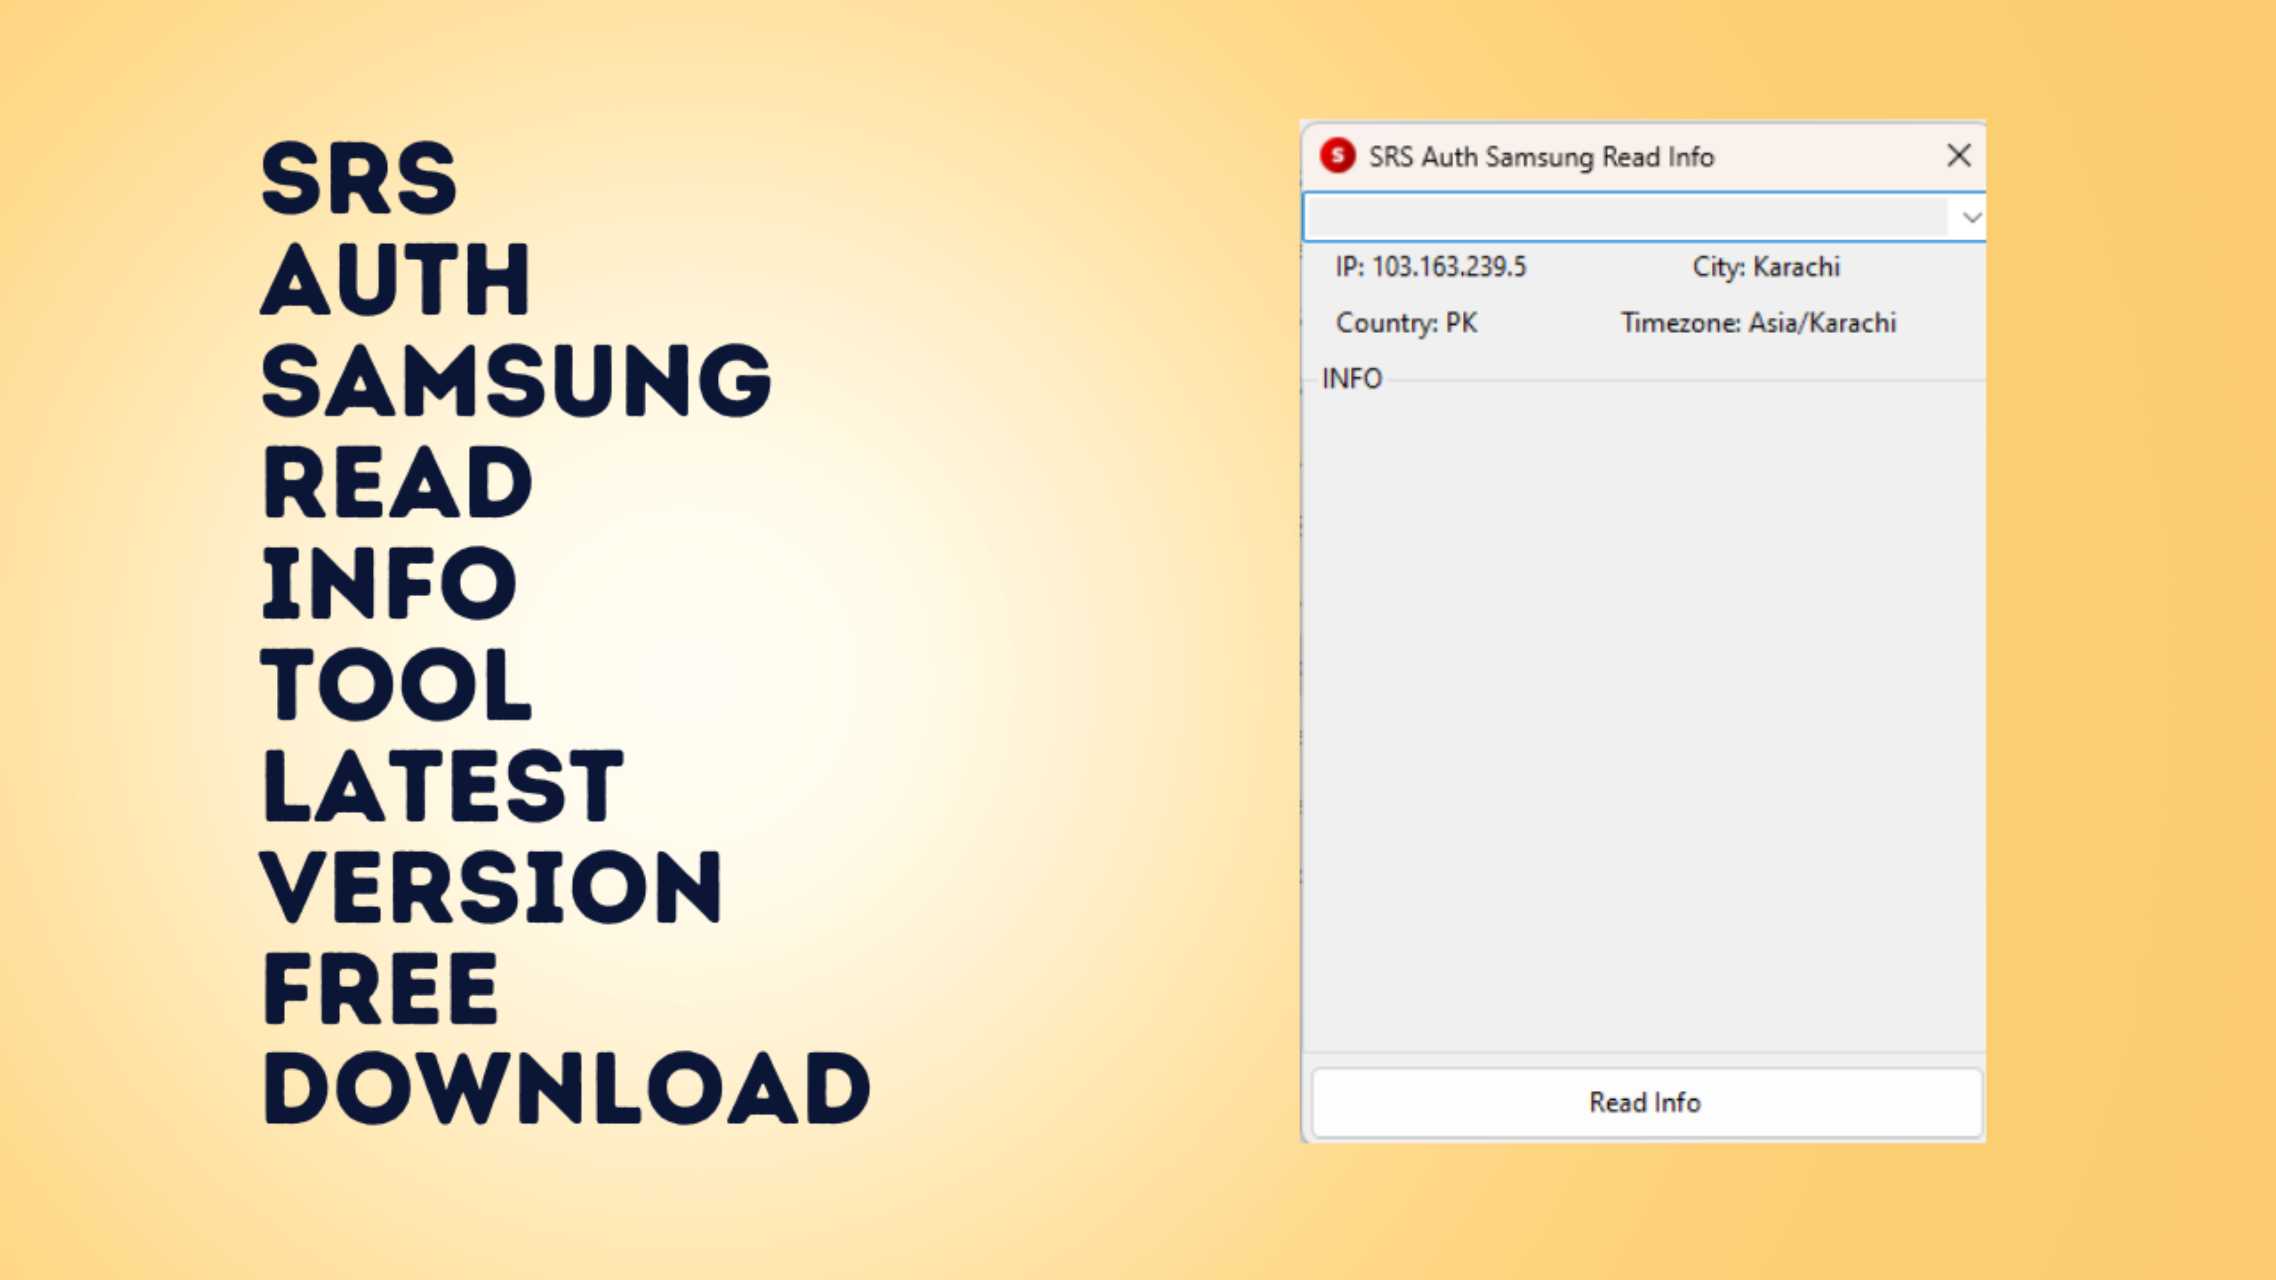 SRS Auth Samsung Read Info Tool Free Download